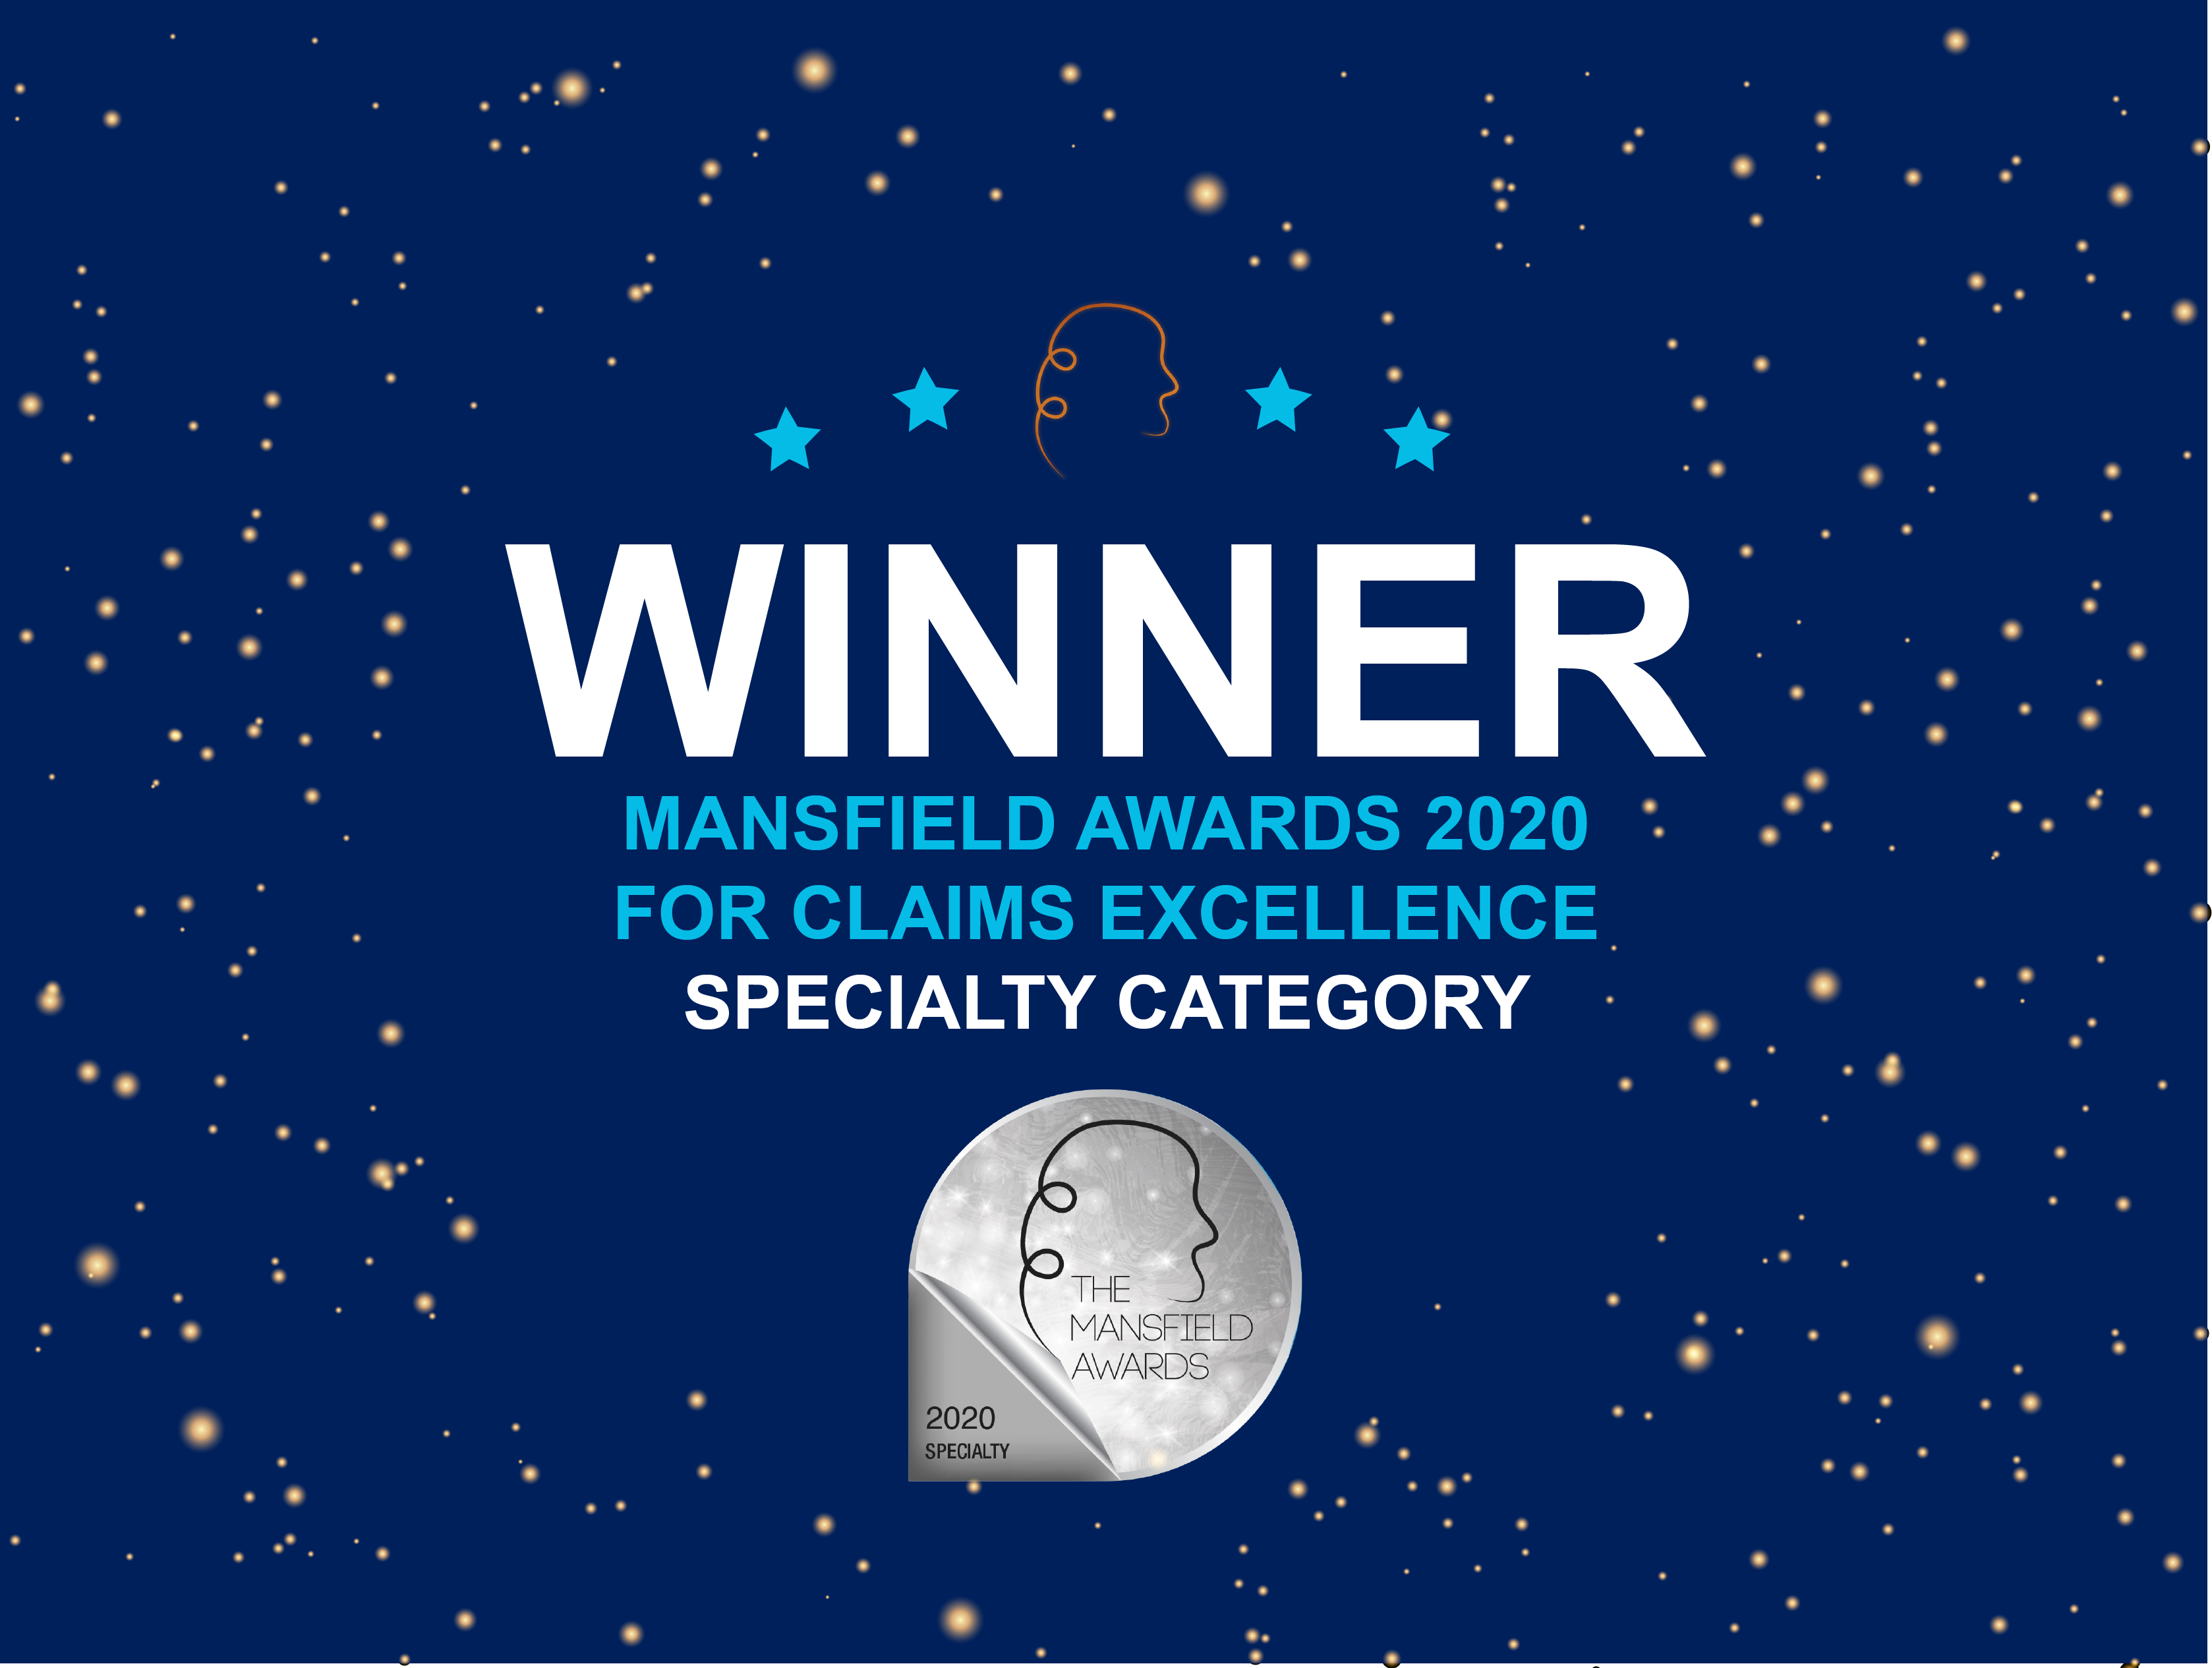 GT Insurance - Winner of the 2020 Mansfield Awards “Specialty” category